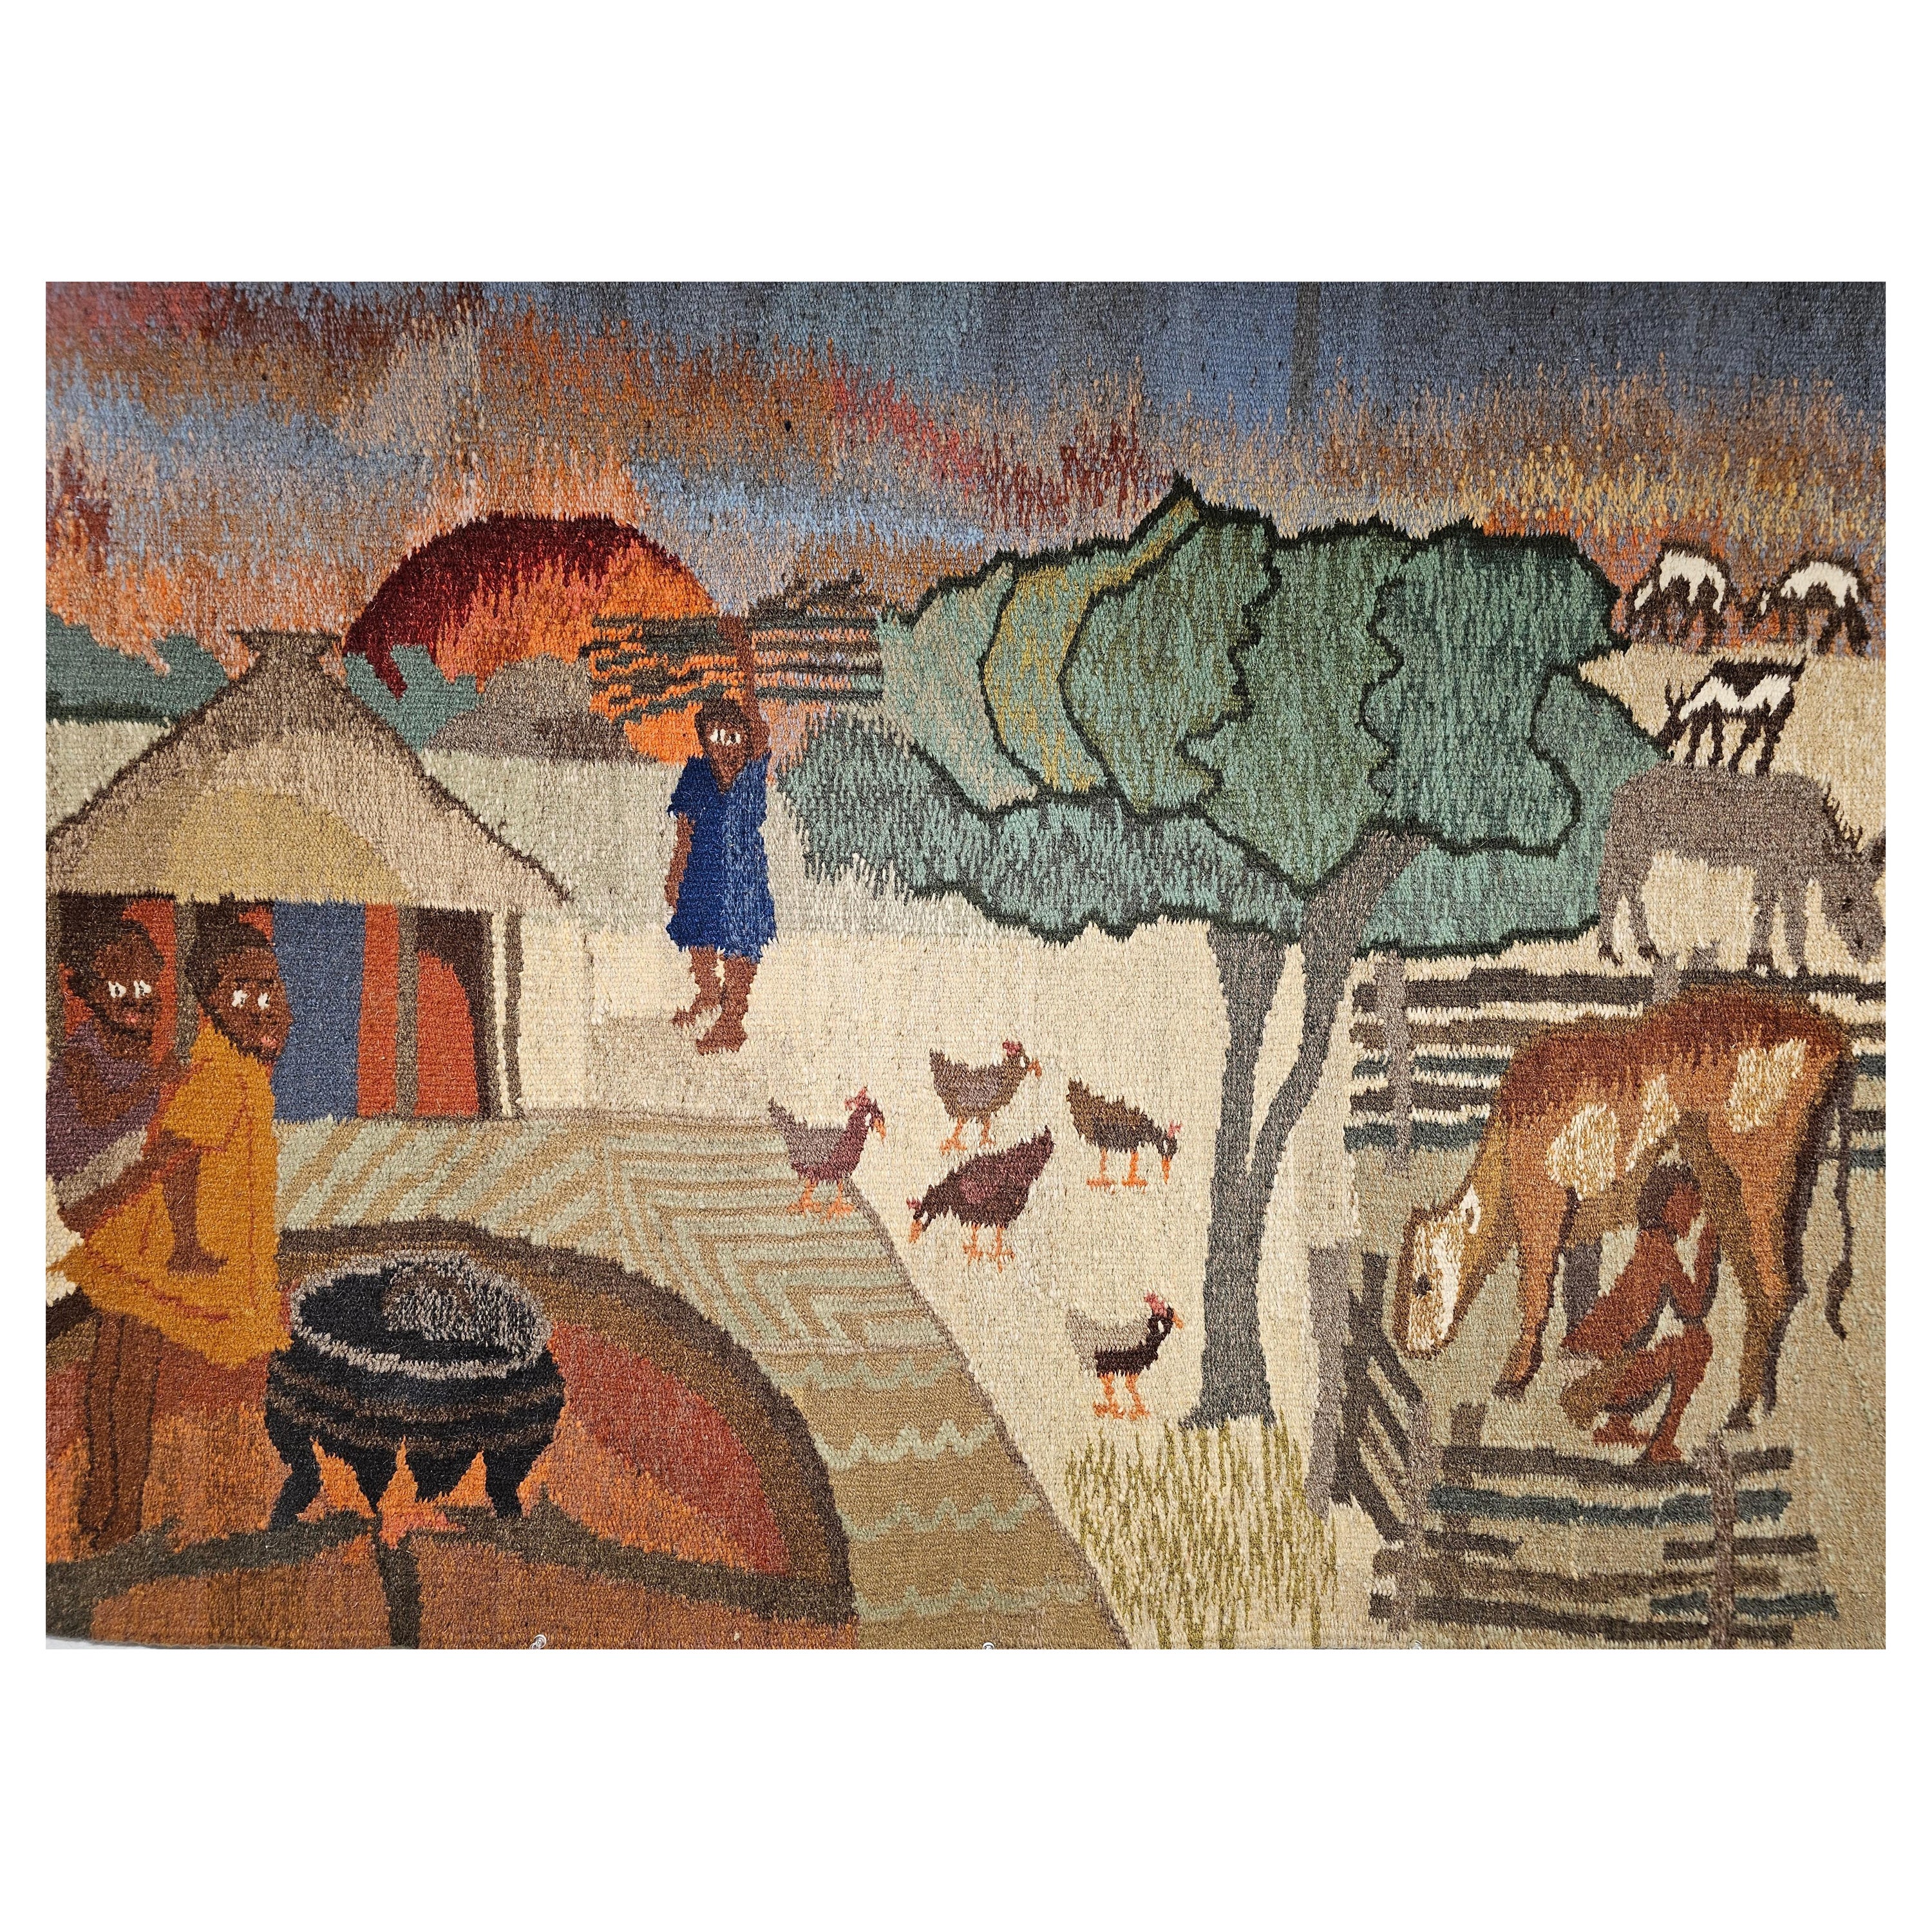 Vintage Hand Woven African Tapestry Depicting Life Scenes Around a Village